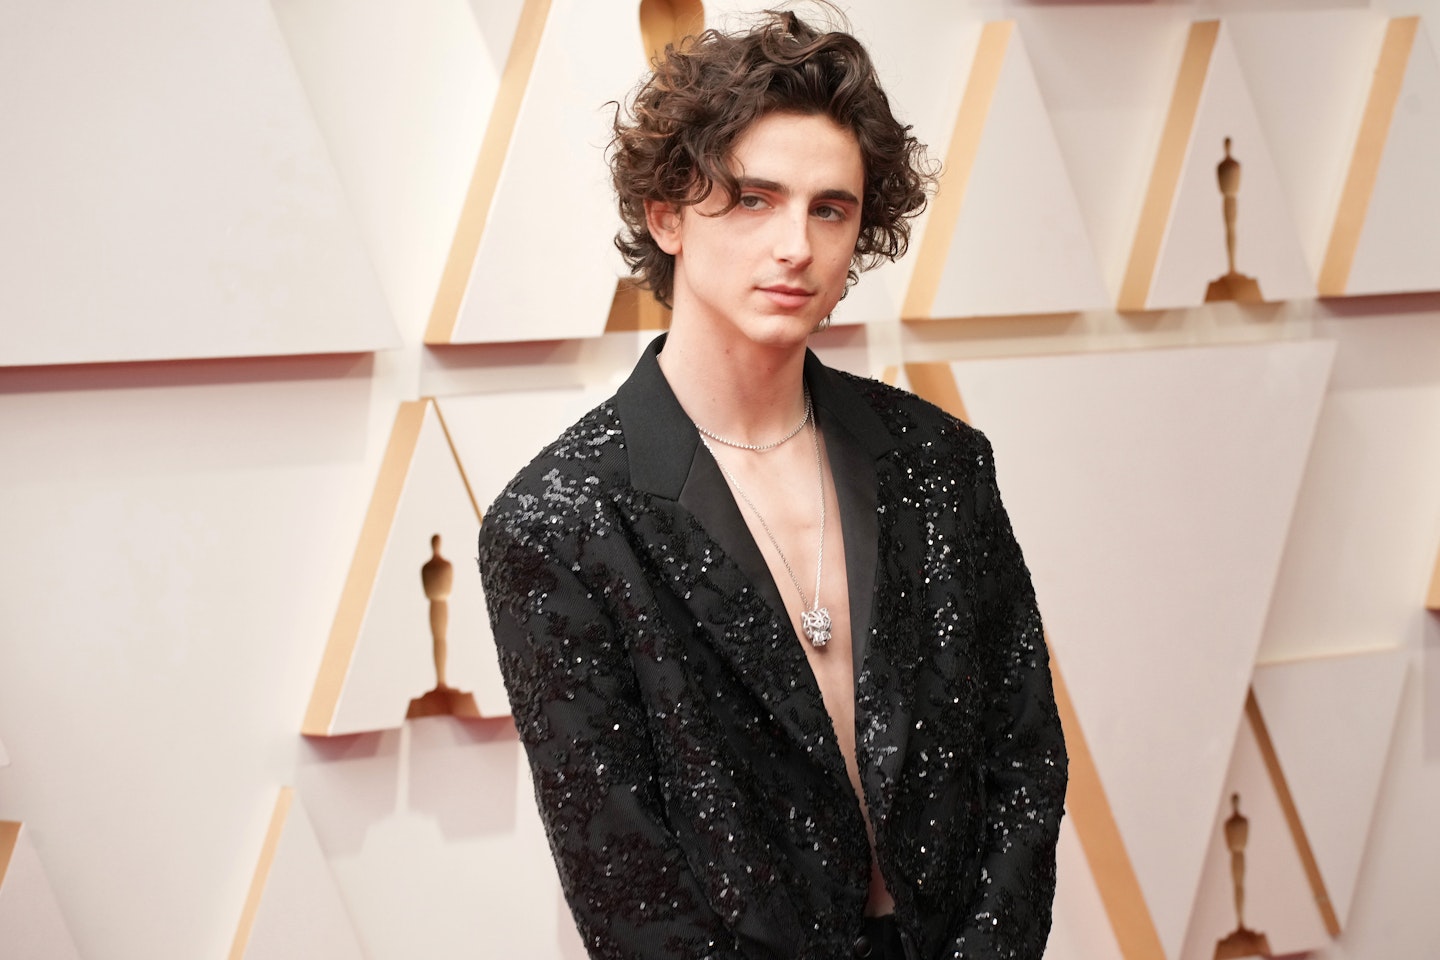 timothee chalamet shirtless outfit louis vuitton womenswear oscars 94th  academy awards - RvceShops - Sacs Louis Vuitton Neverfull 'Purple Teal